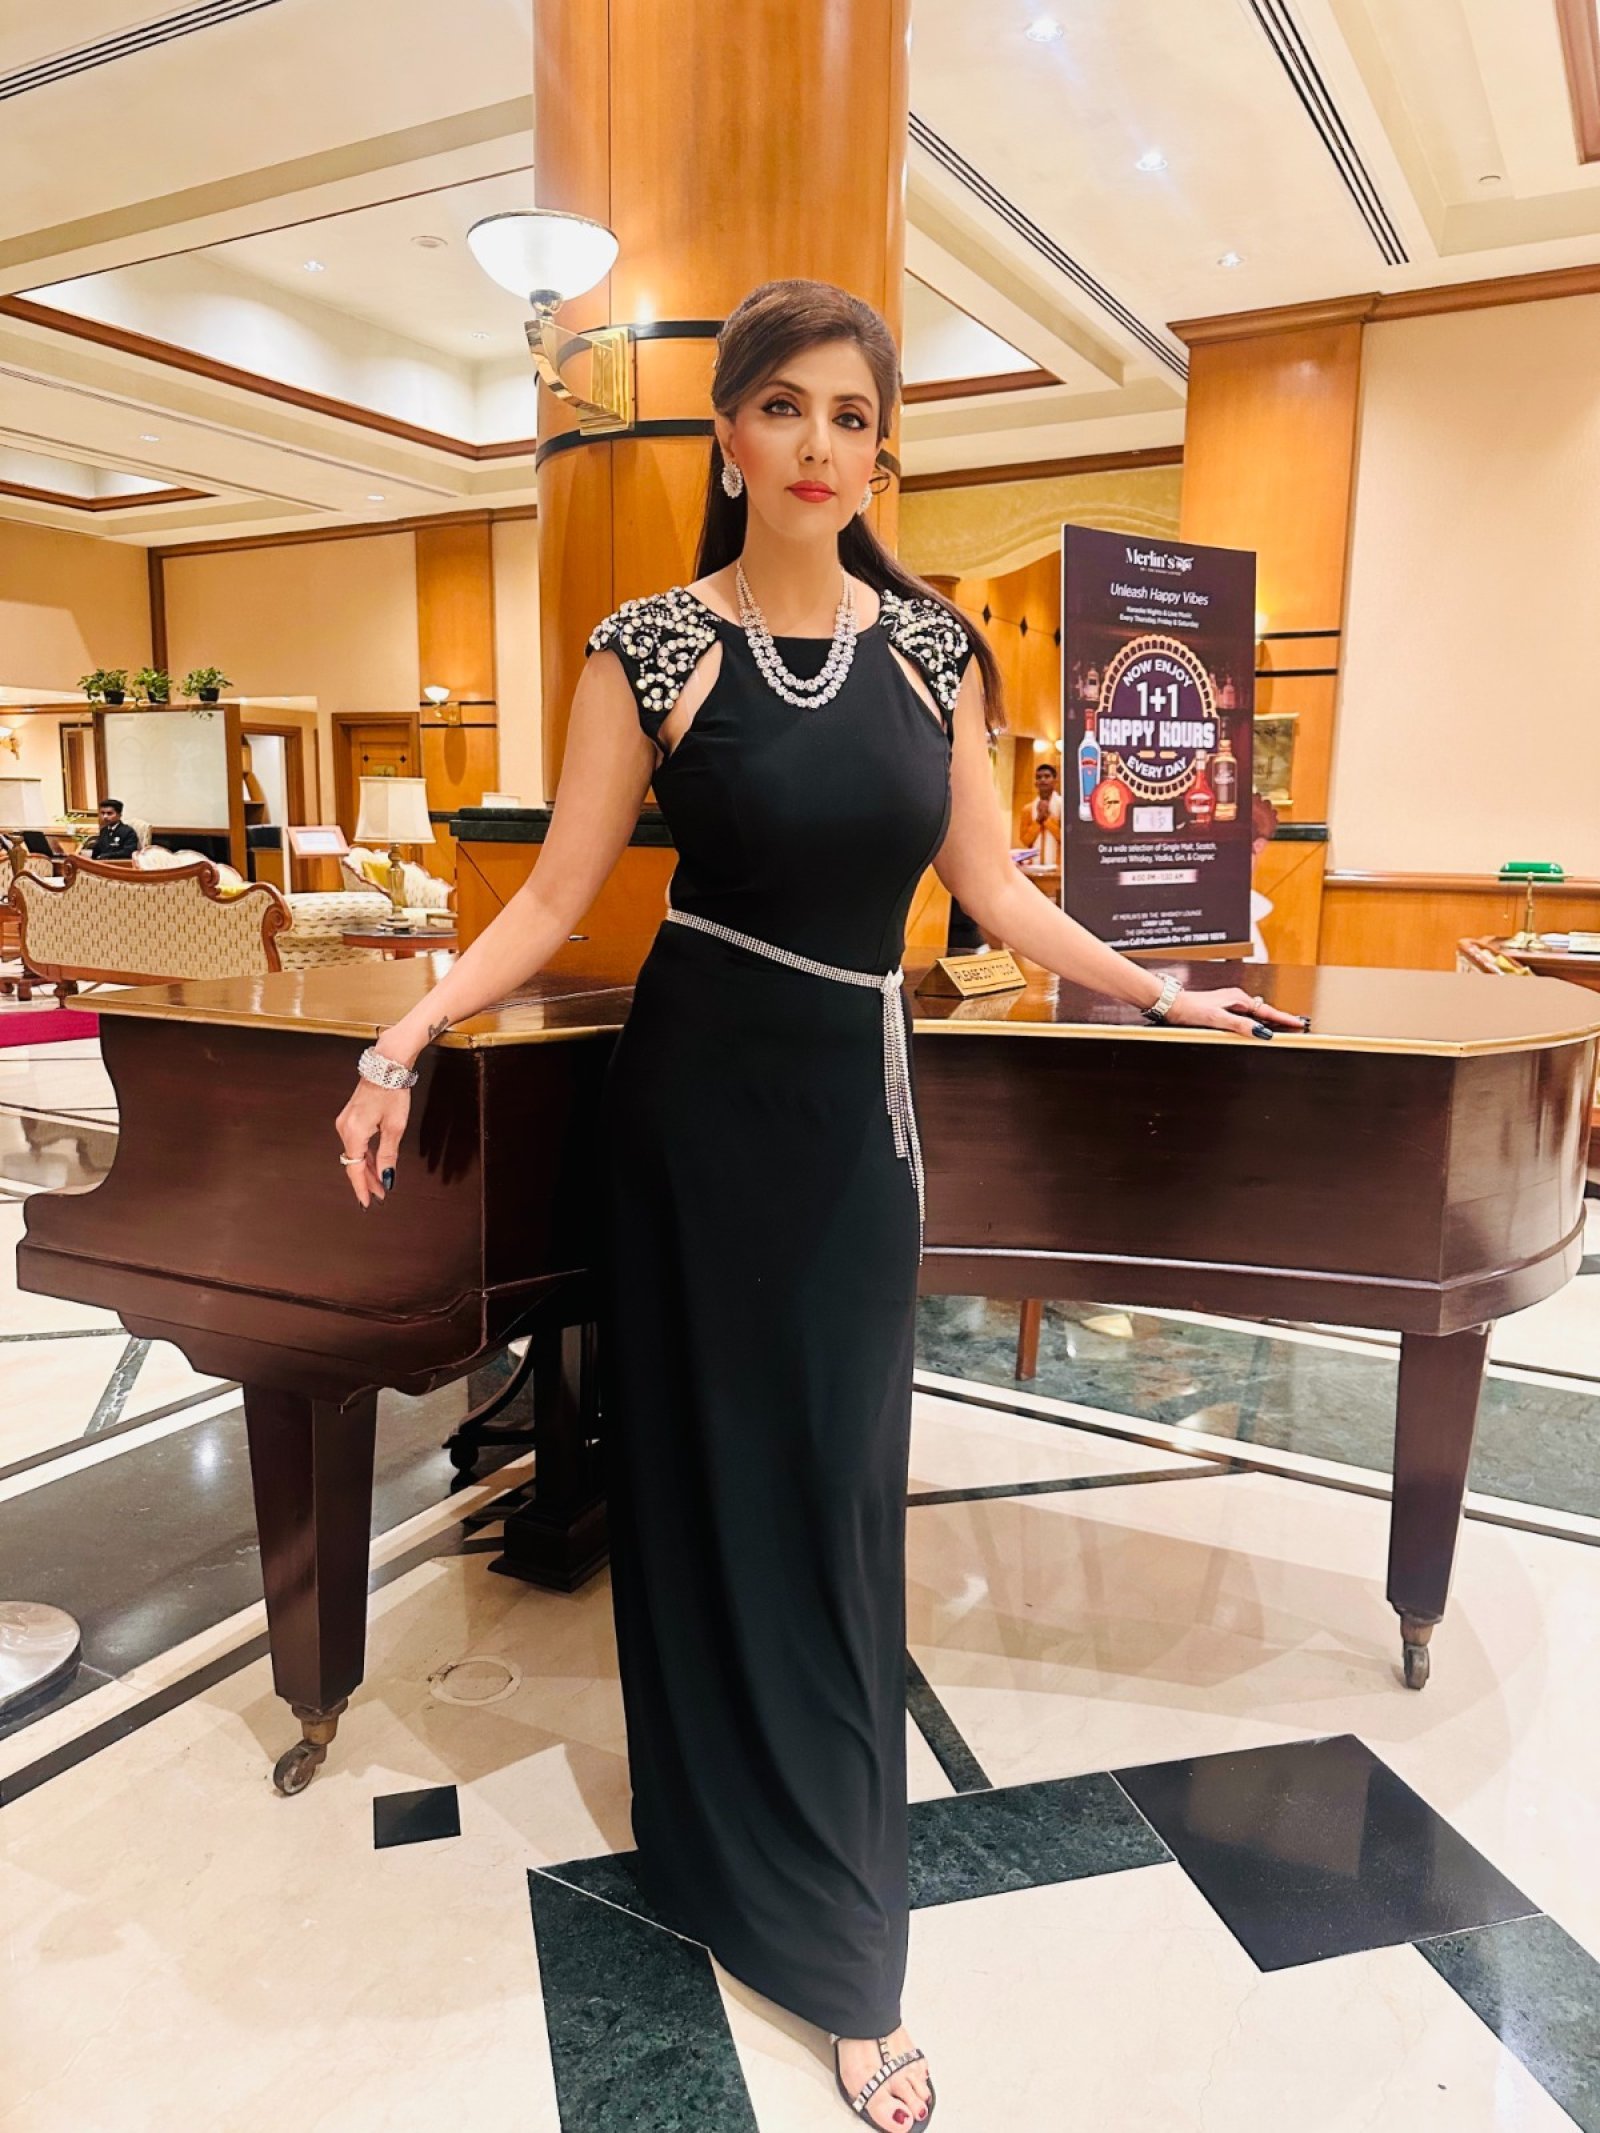 Jyoti Saxena Bags The Most Dazzling Diva Of The Year Award